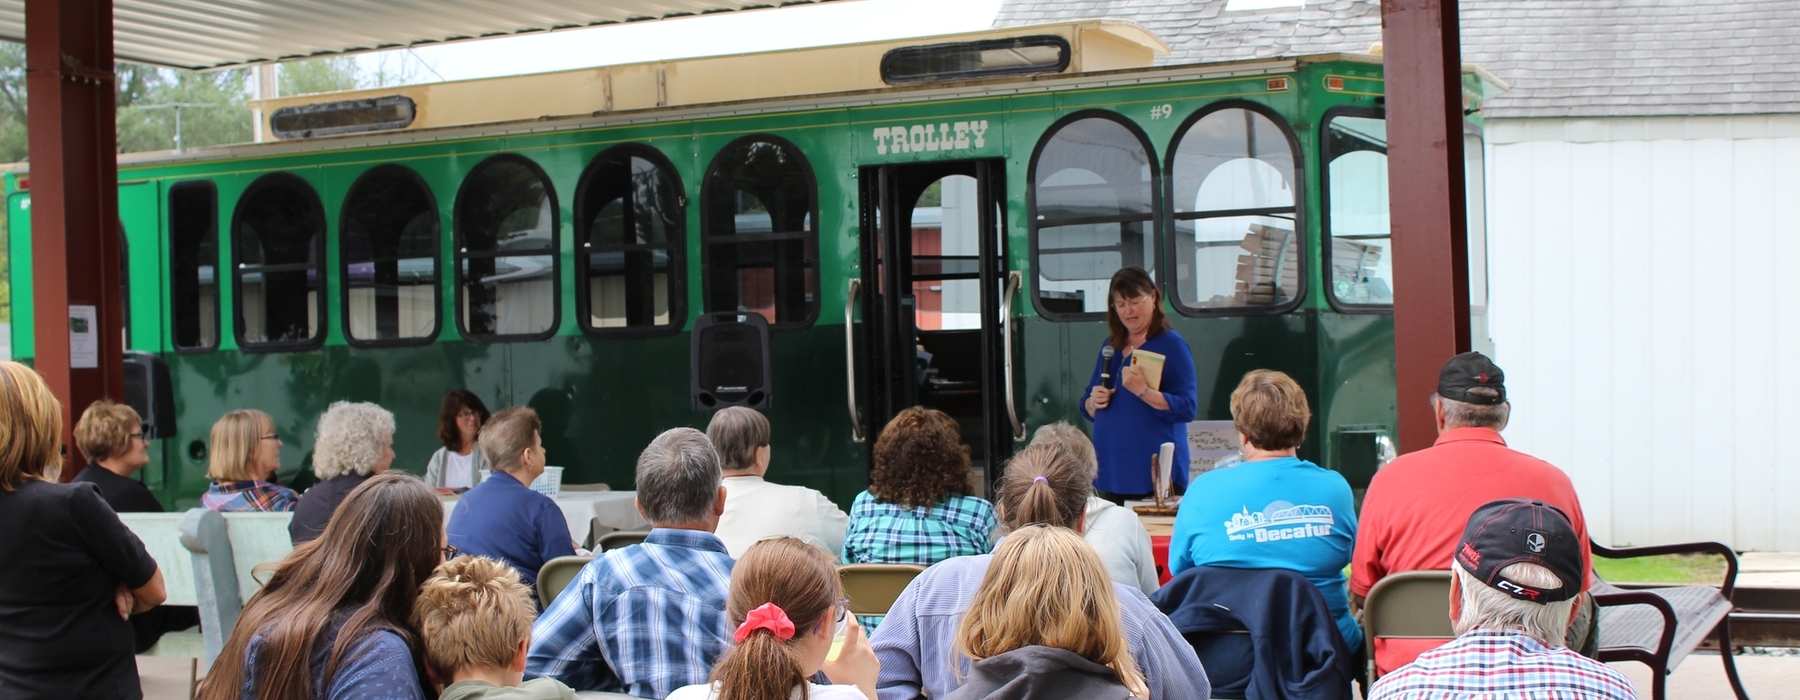 Woman author presenting in front of community art space trolly